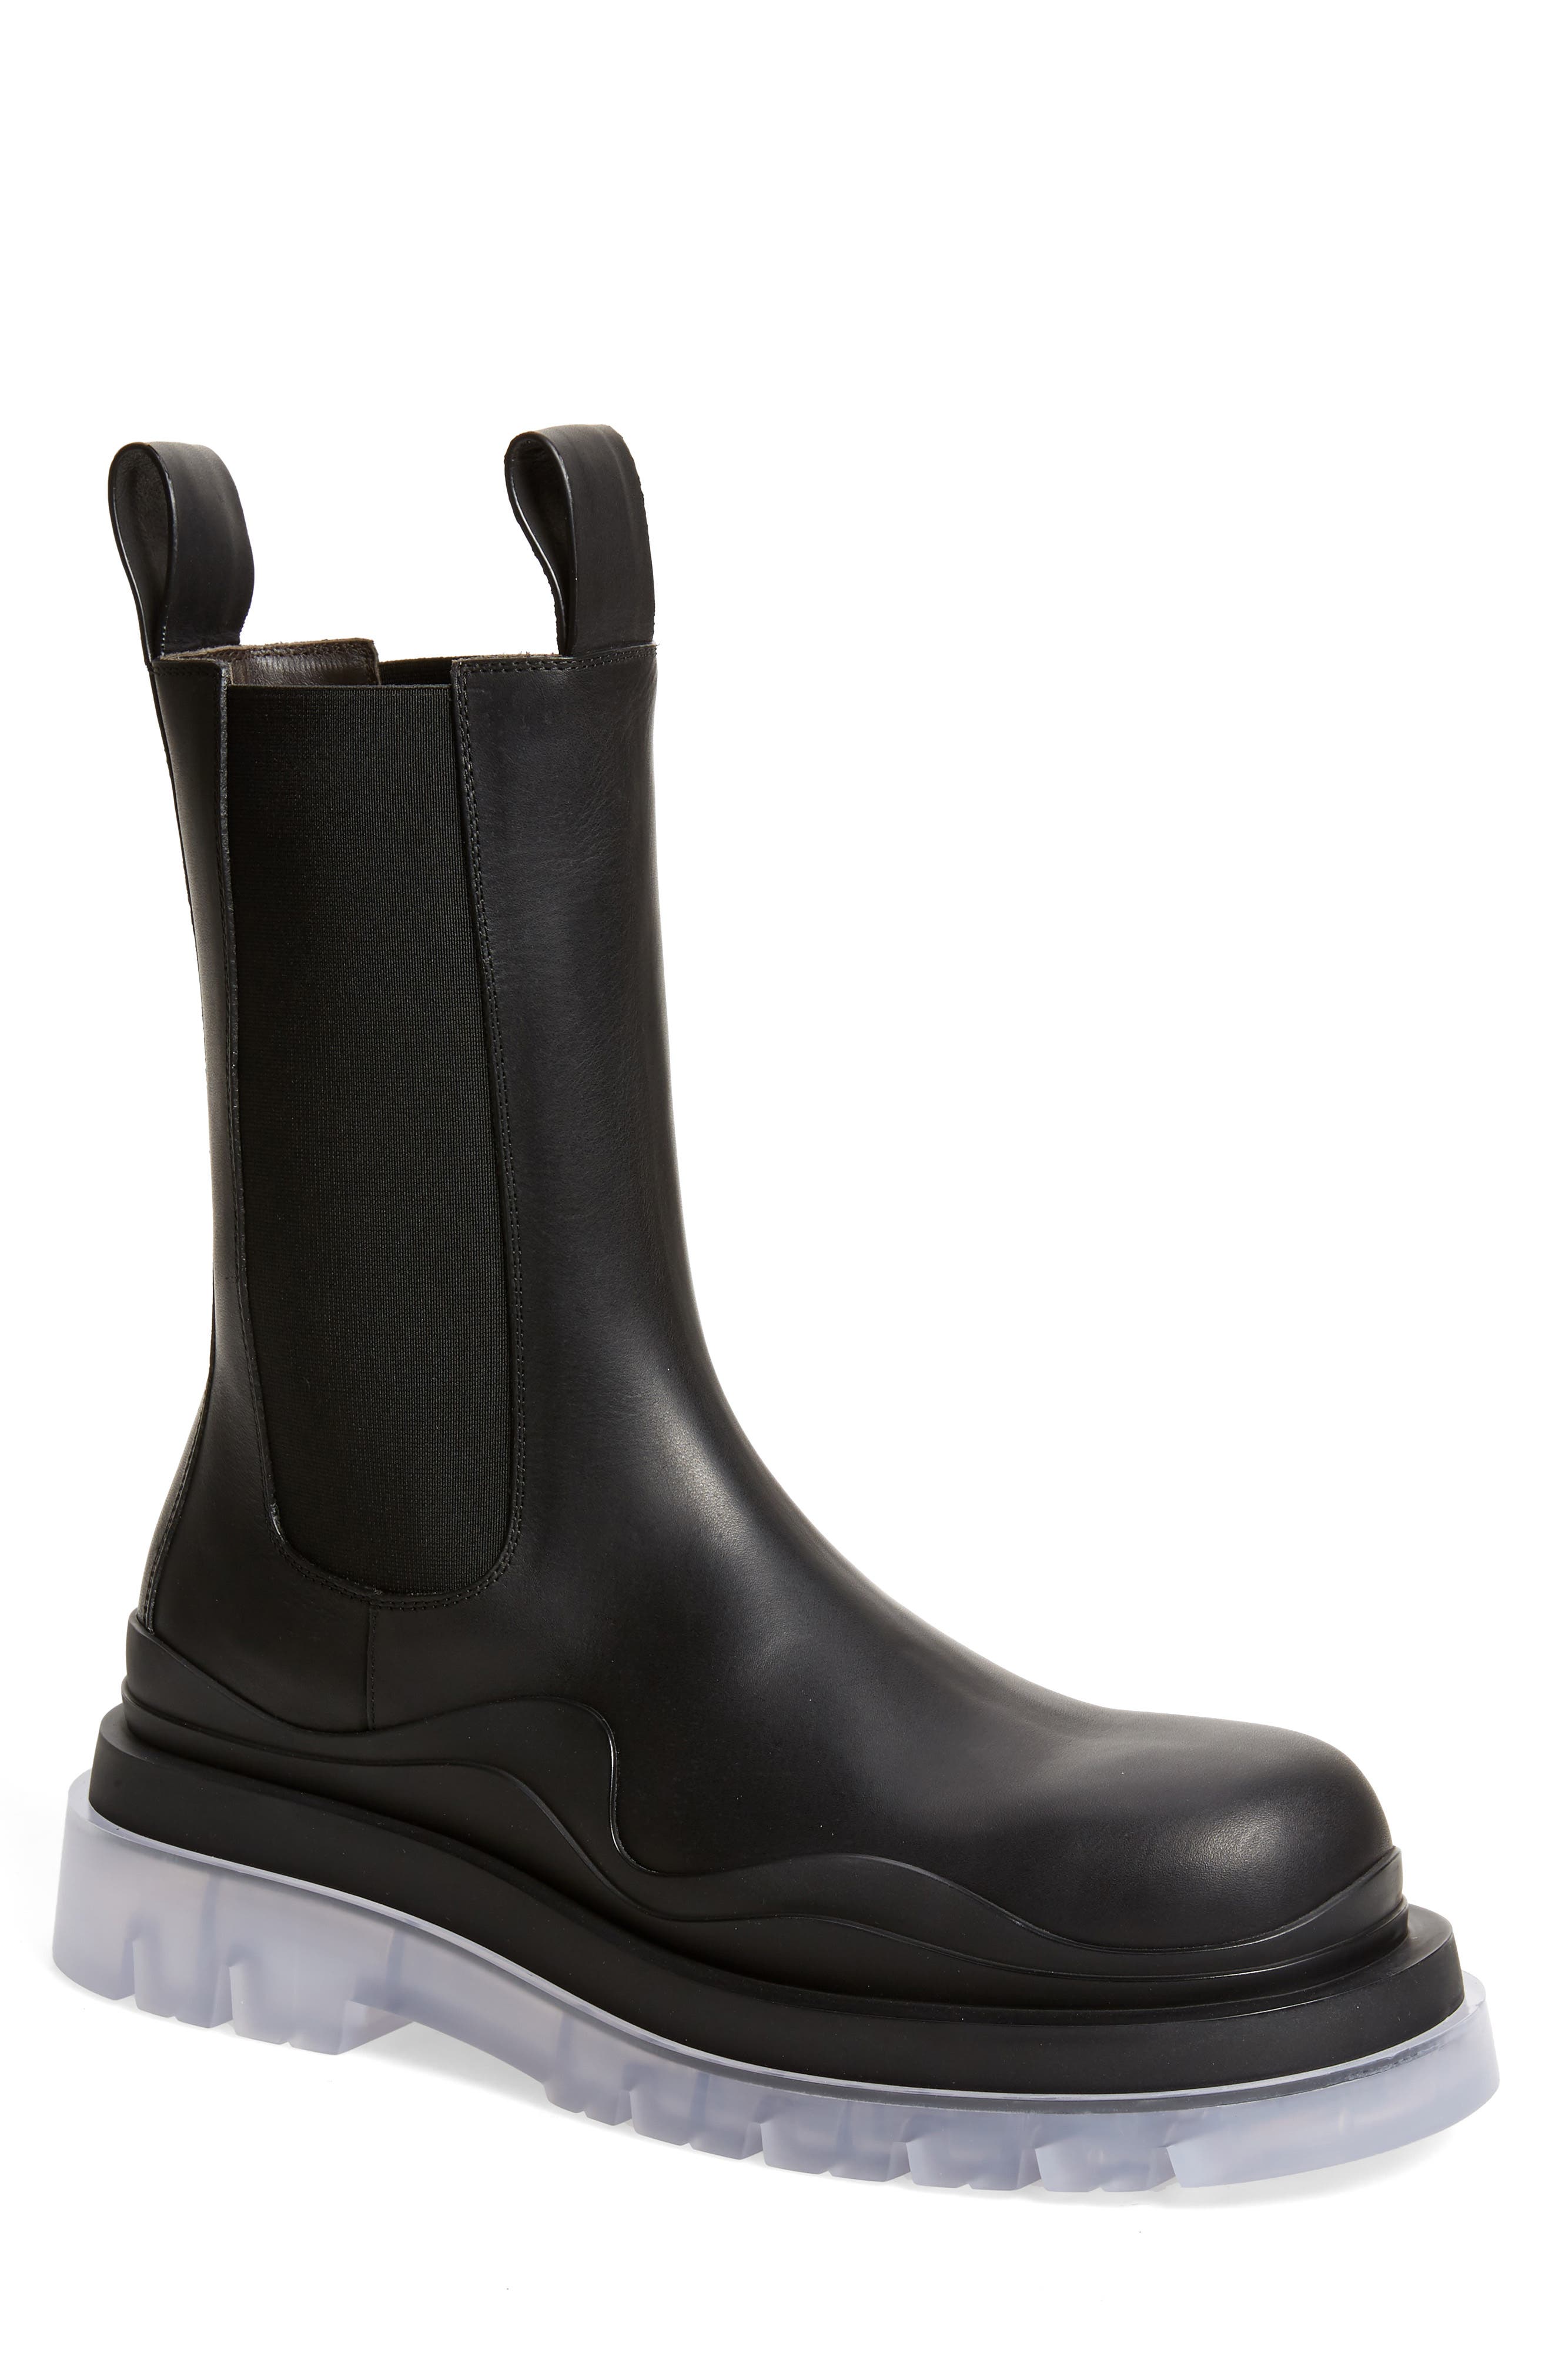 mens clear boots